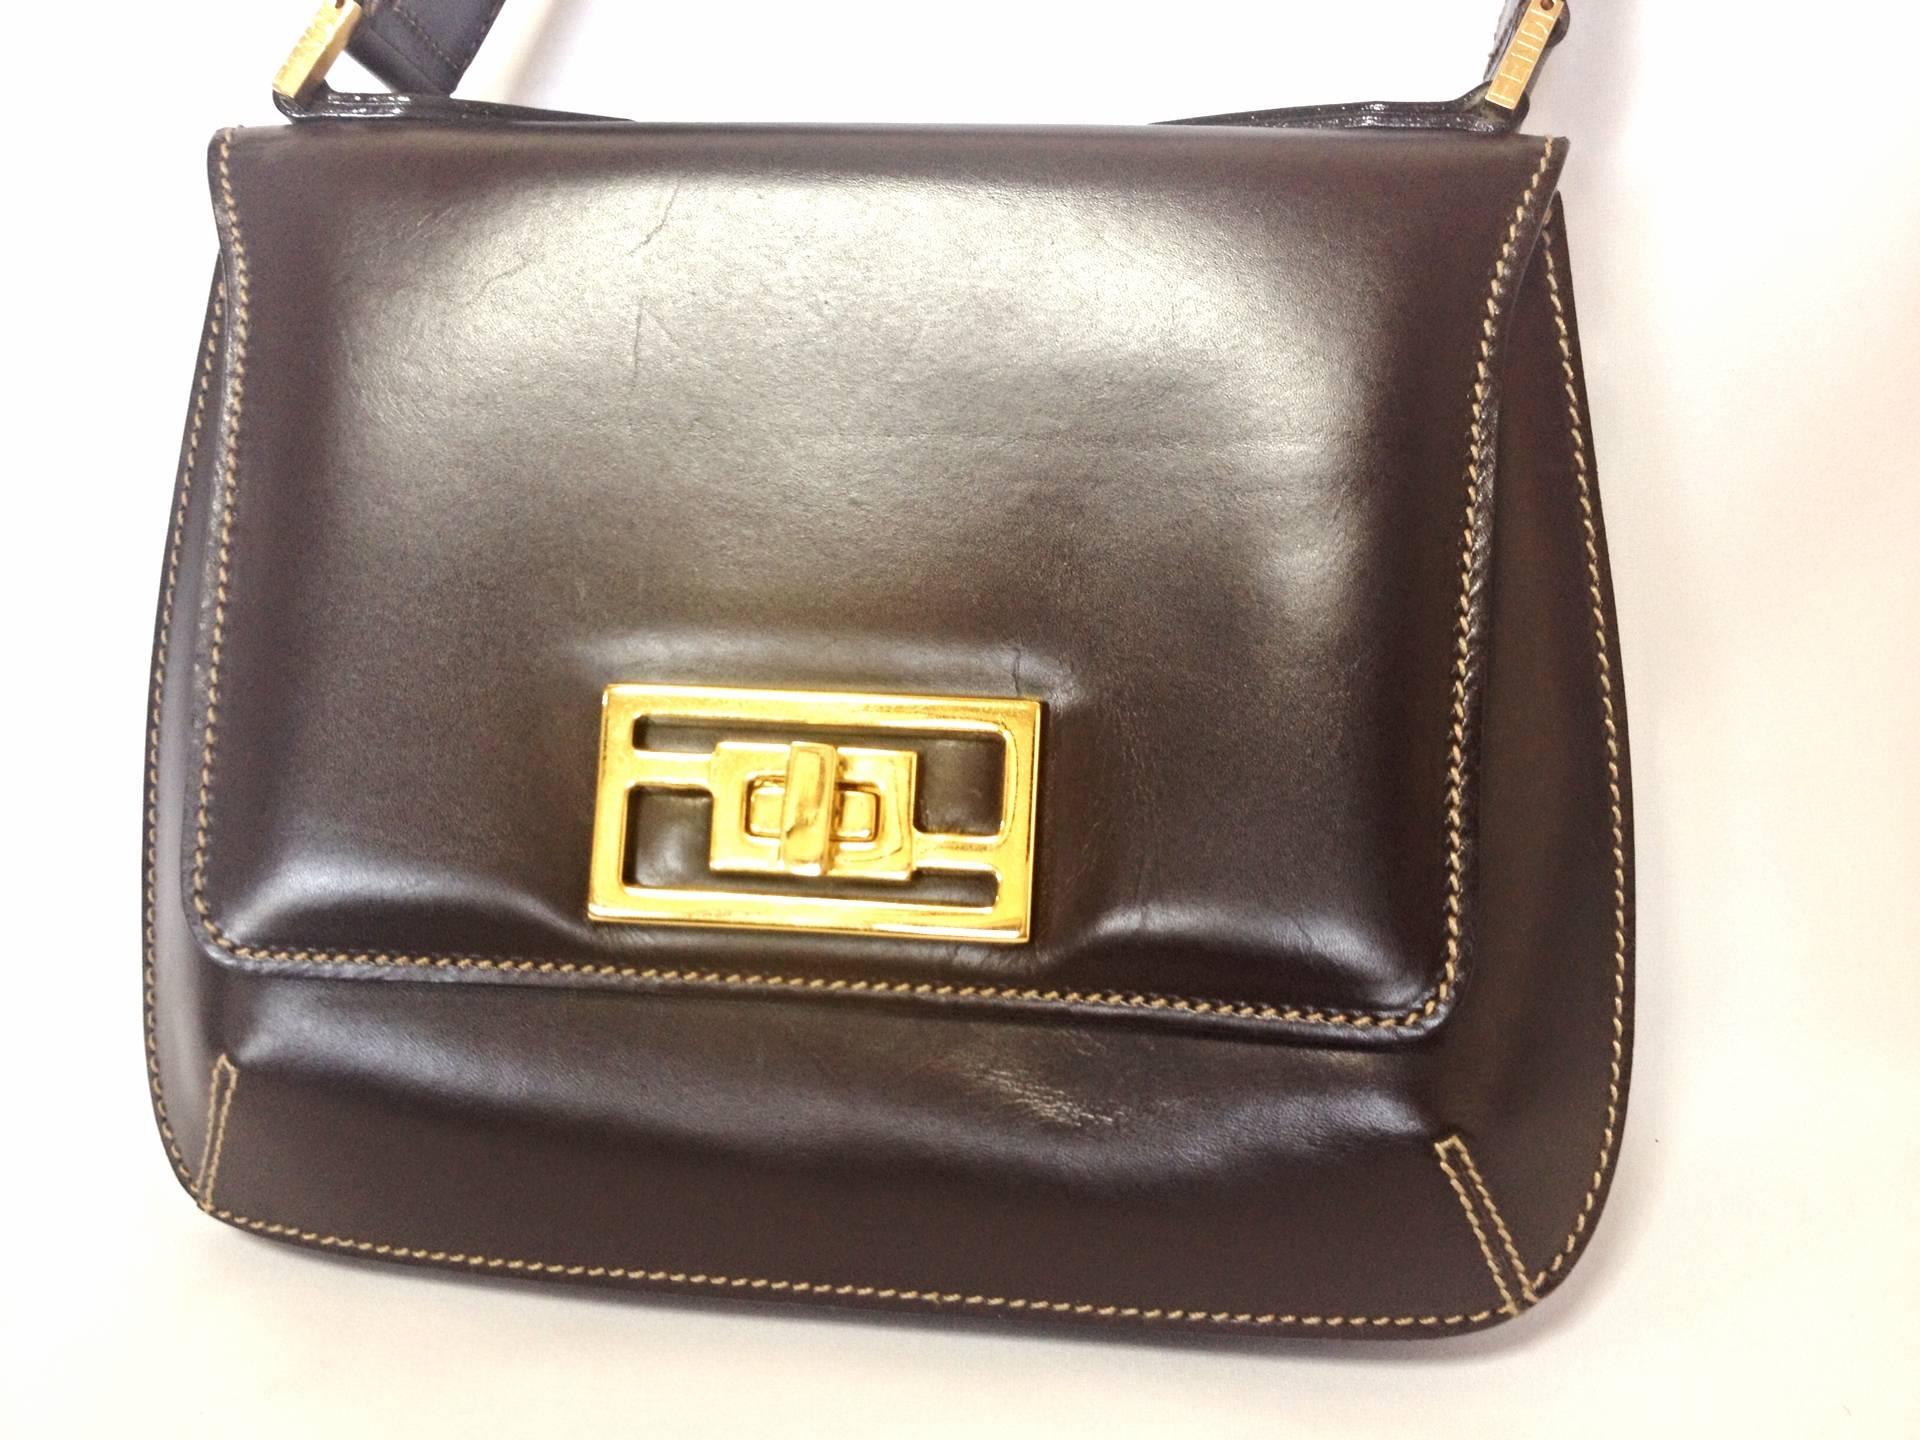 1990s. Vintage FENDI genuine dark brown leather handbag with golden FF logo at closure. Rare masterpiece

Introducing another masterpiece leather bag from FENDI back in the 90's.
This classic handbag would never go out of style. Very classic and yet